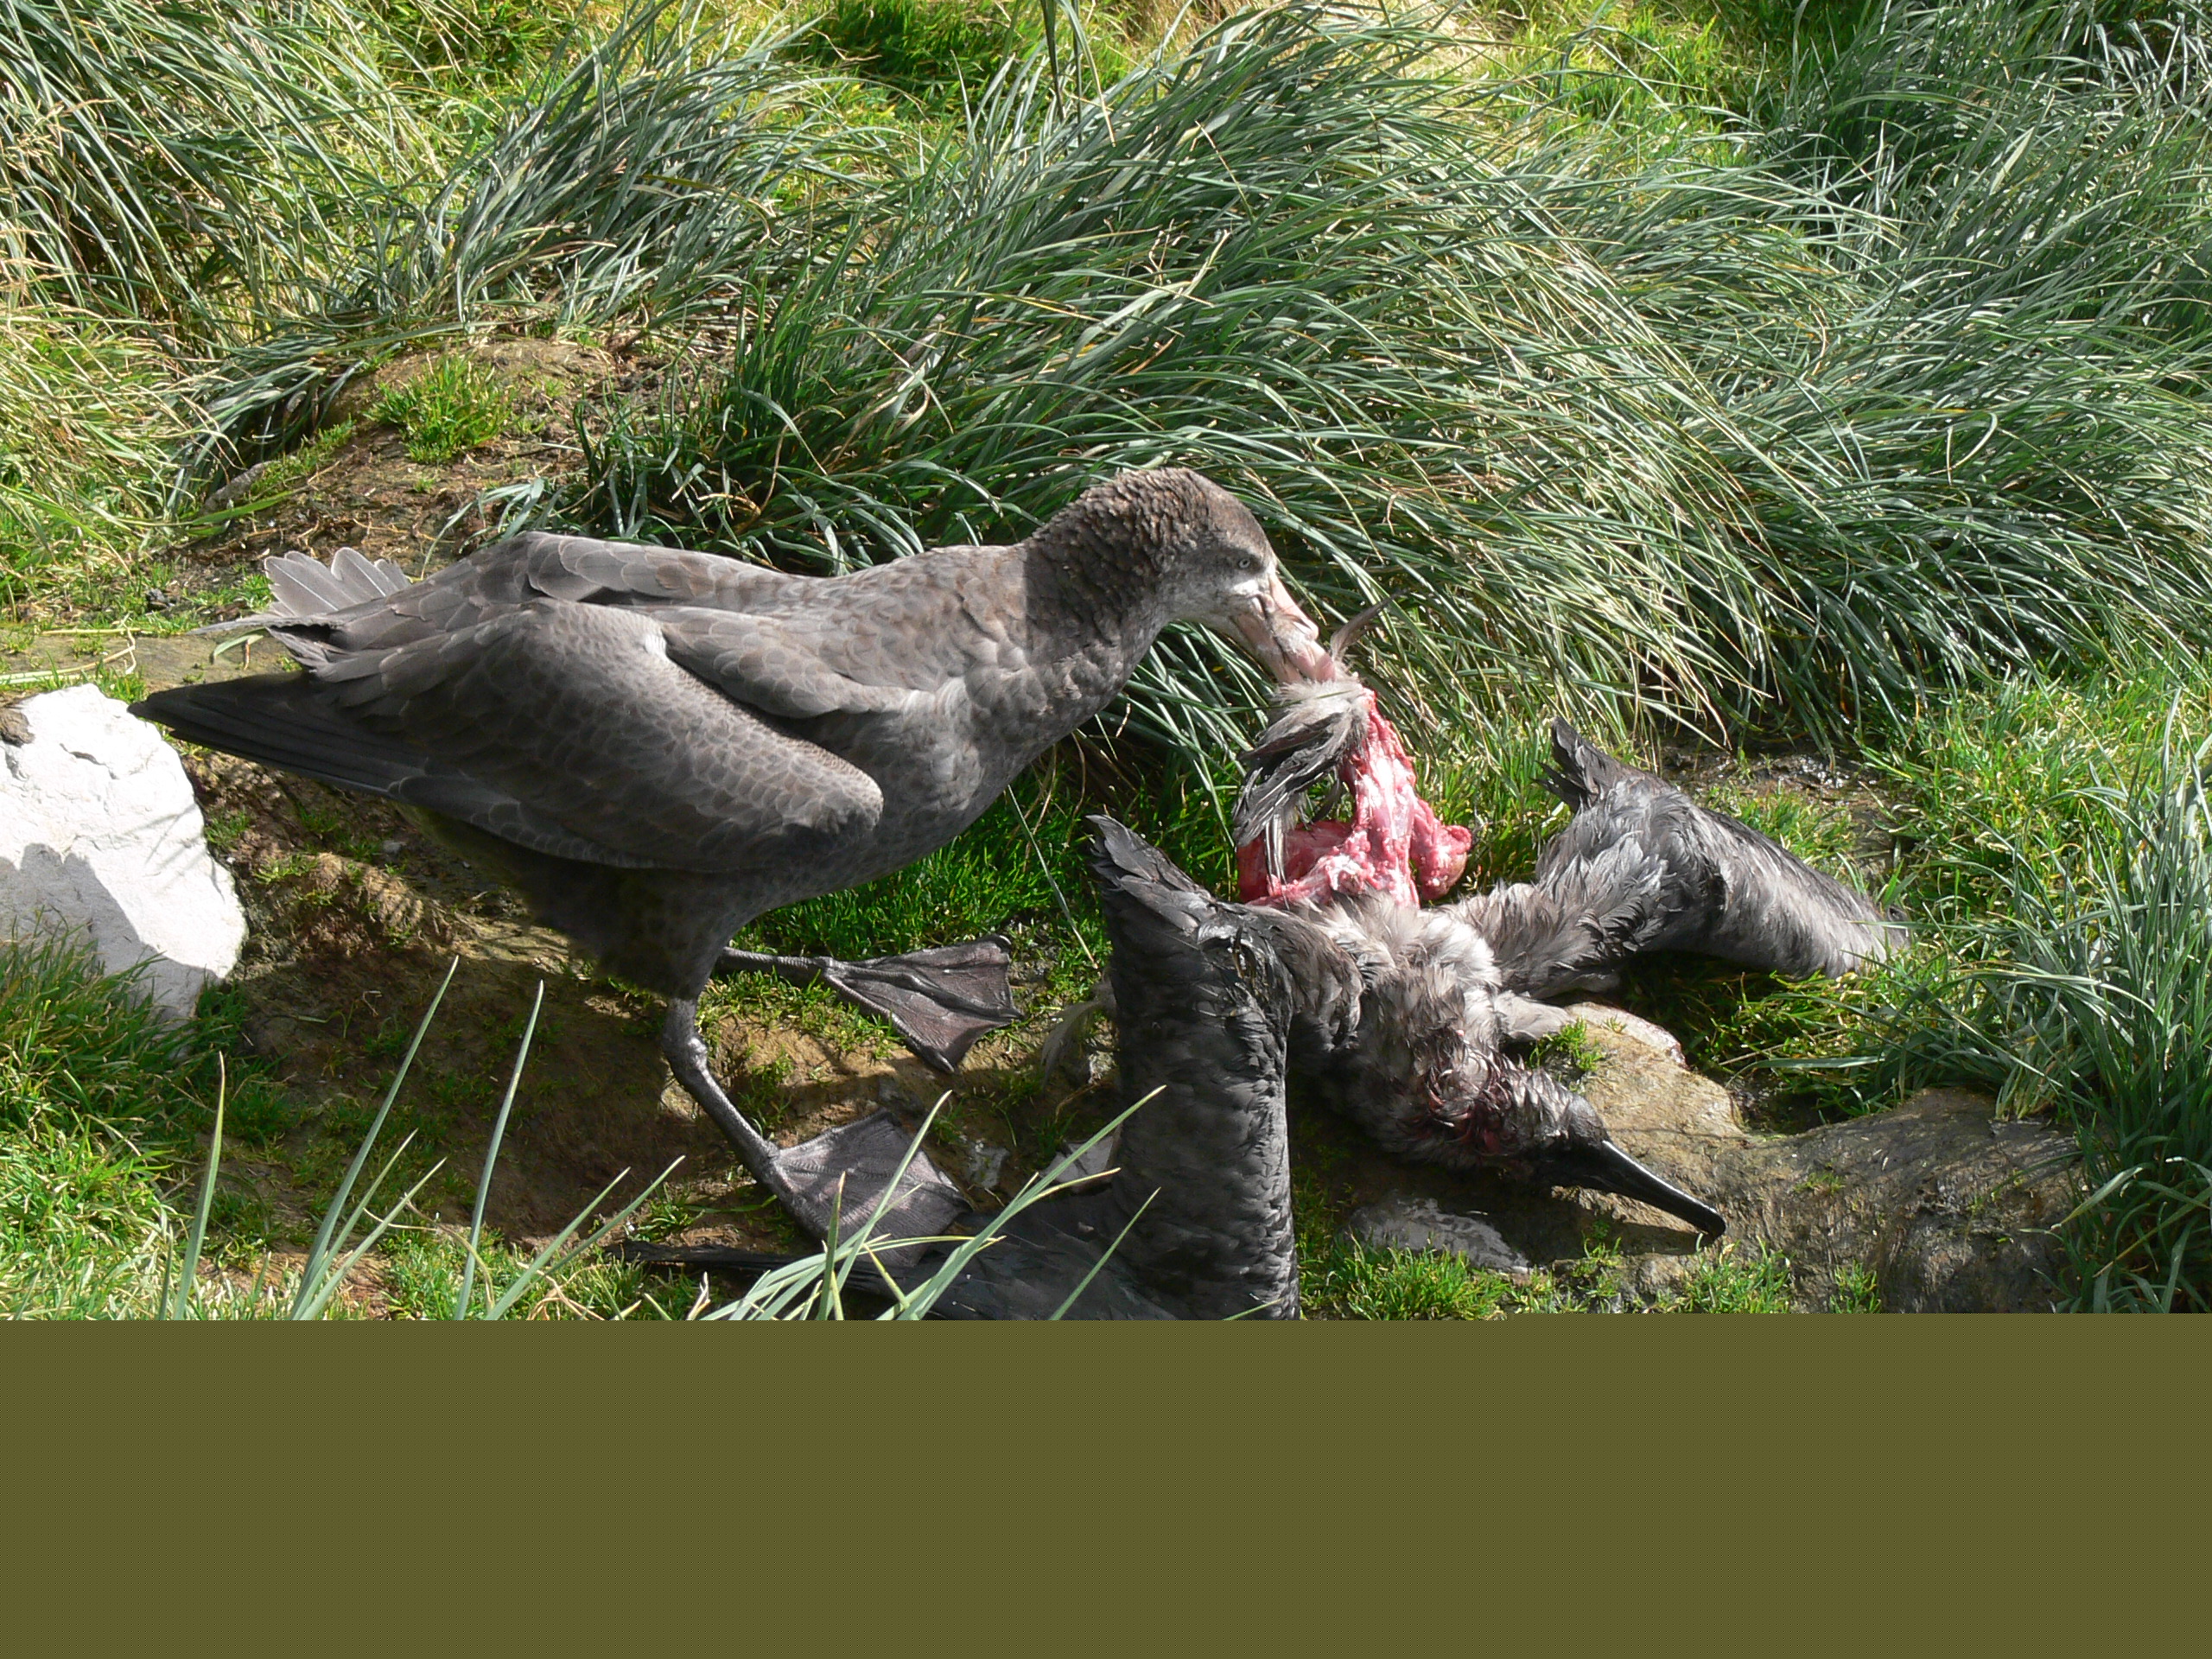 Northern Giant Petrel with sooty albatross chick Marienne de Villiers